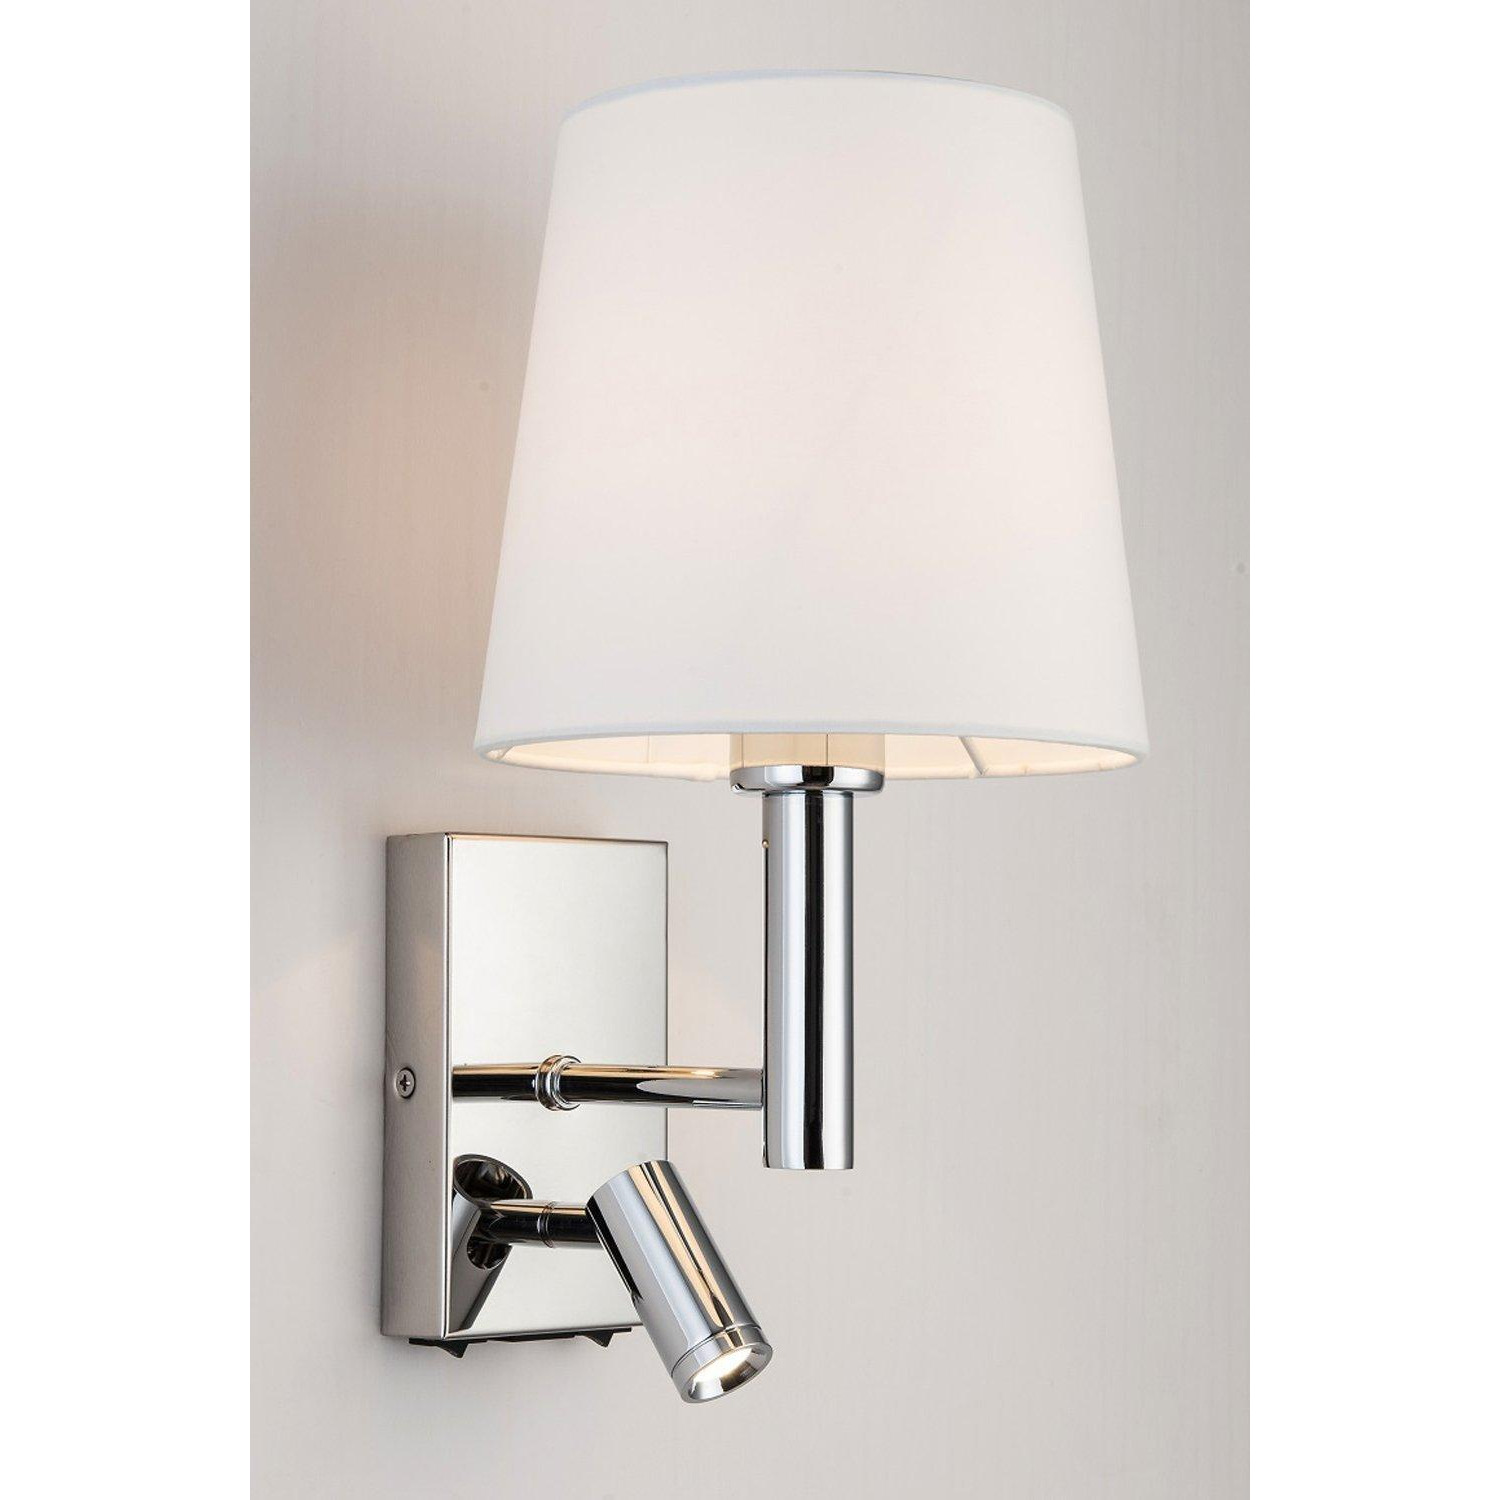 Wall Light with switches Adjustable LED Reading Light Cylinder Shade - image 1